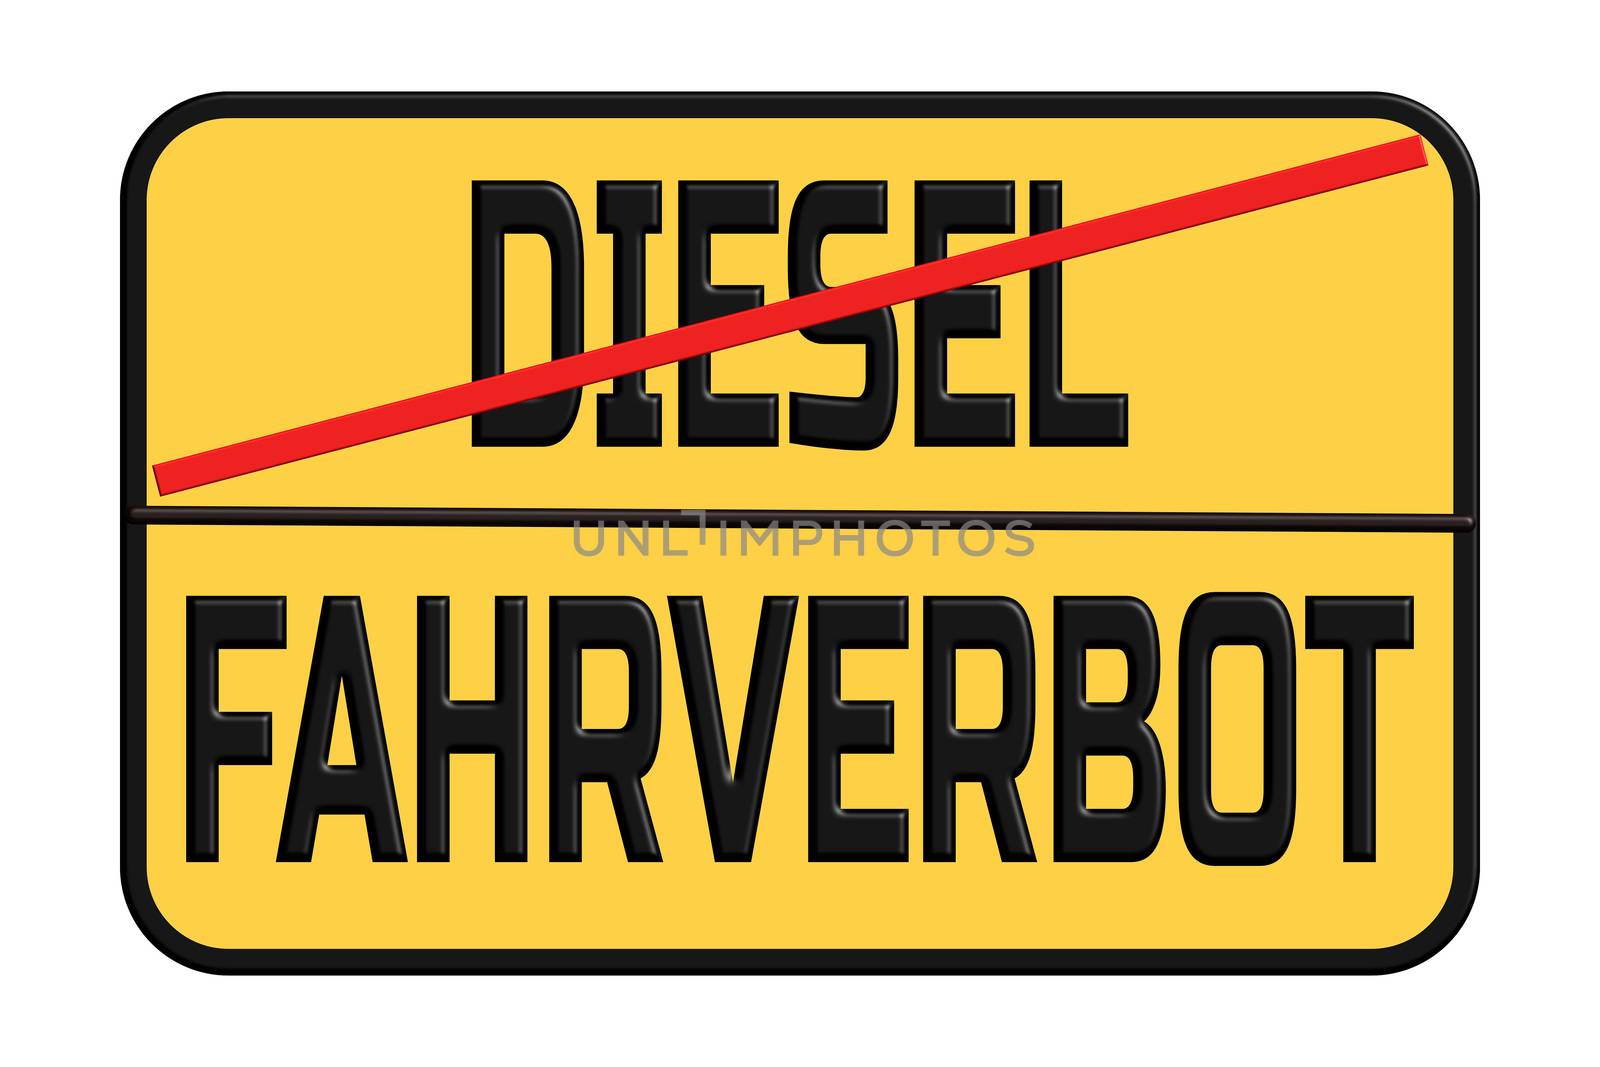 Diesel driving ban in the city street sign - in German     by JFsPic